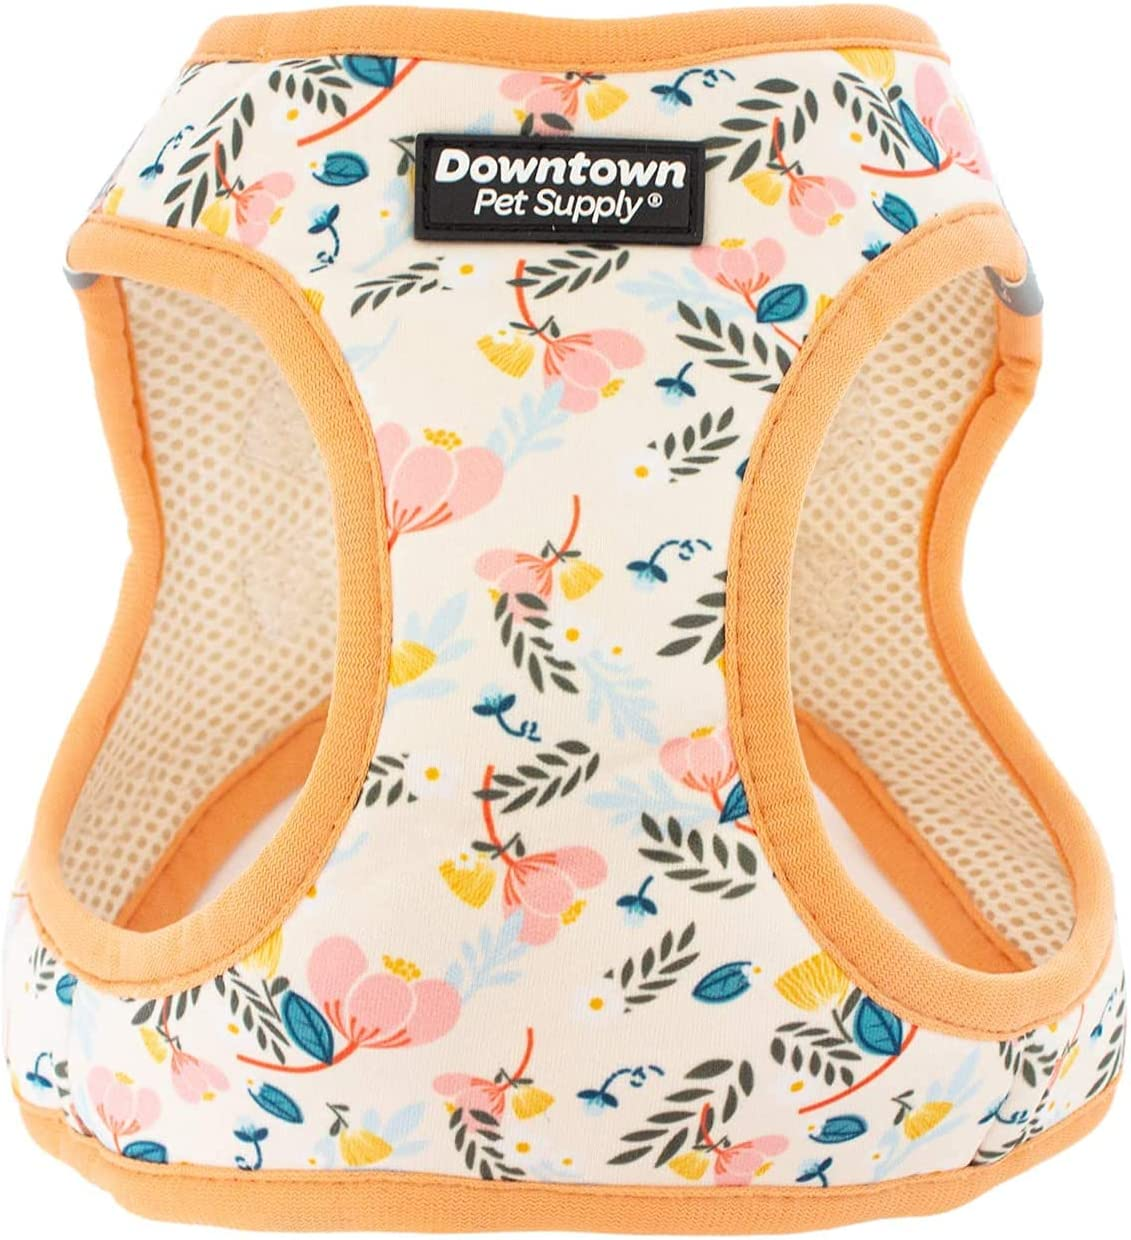 Downtown Pet Supply - Dog Harness for Small, Medium and Large Dogs No-Pull - Step in Dog Harness - Padded Mesh Fabric Dog Vest with Reflective Trim, Velcro and Buckle Straps